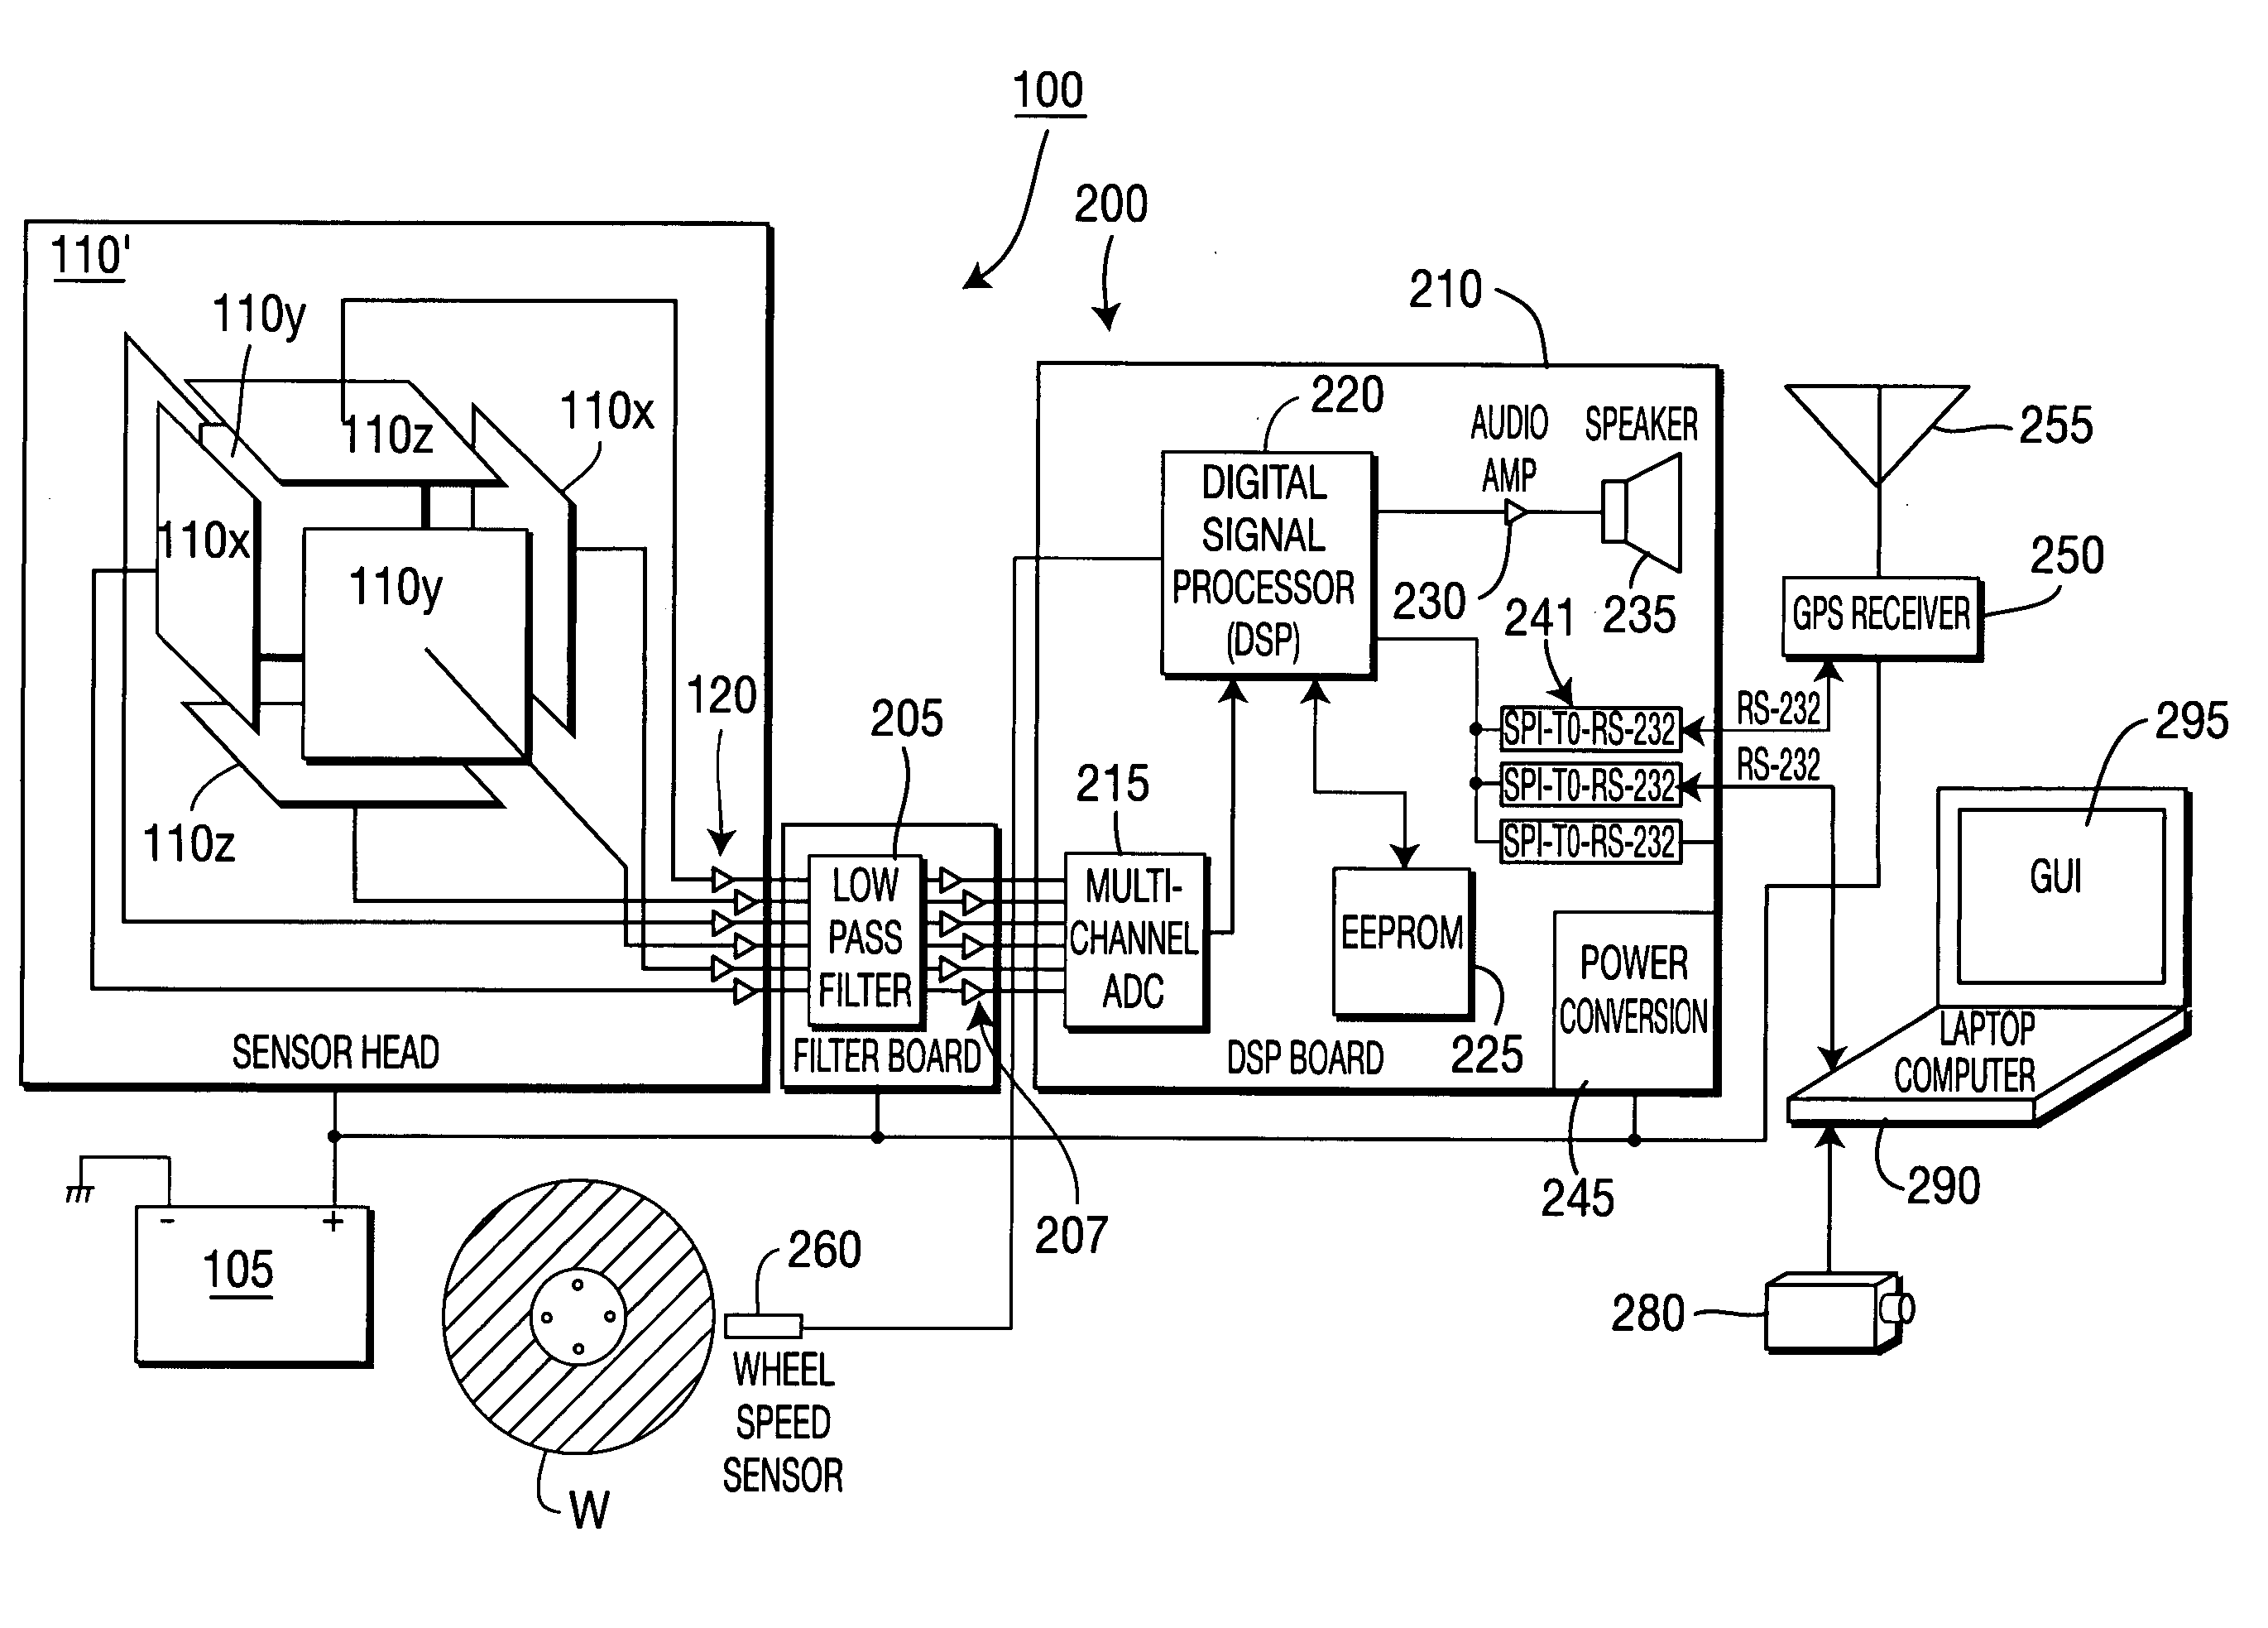 Method for sensing an electric field